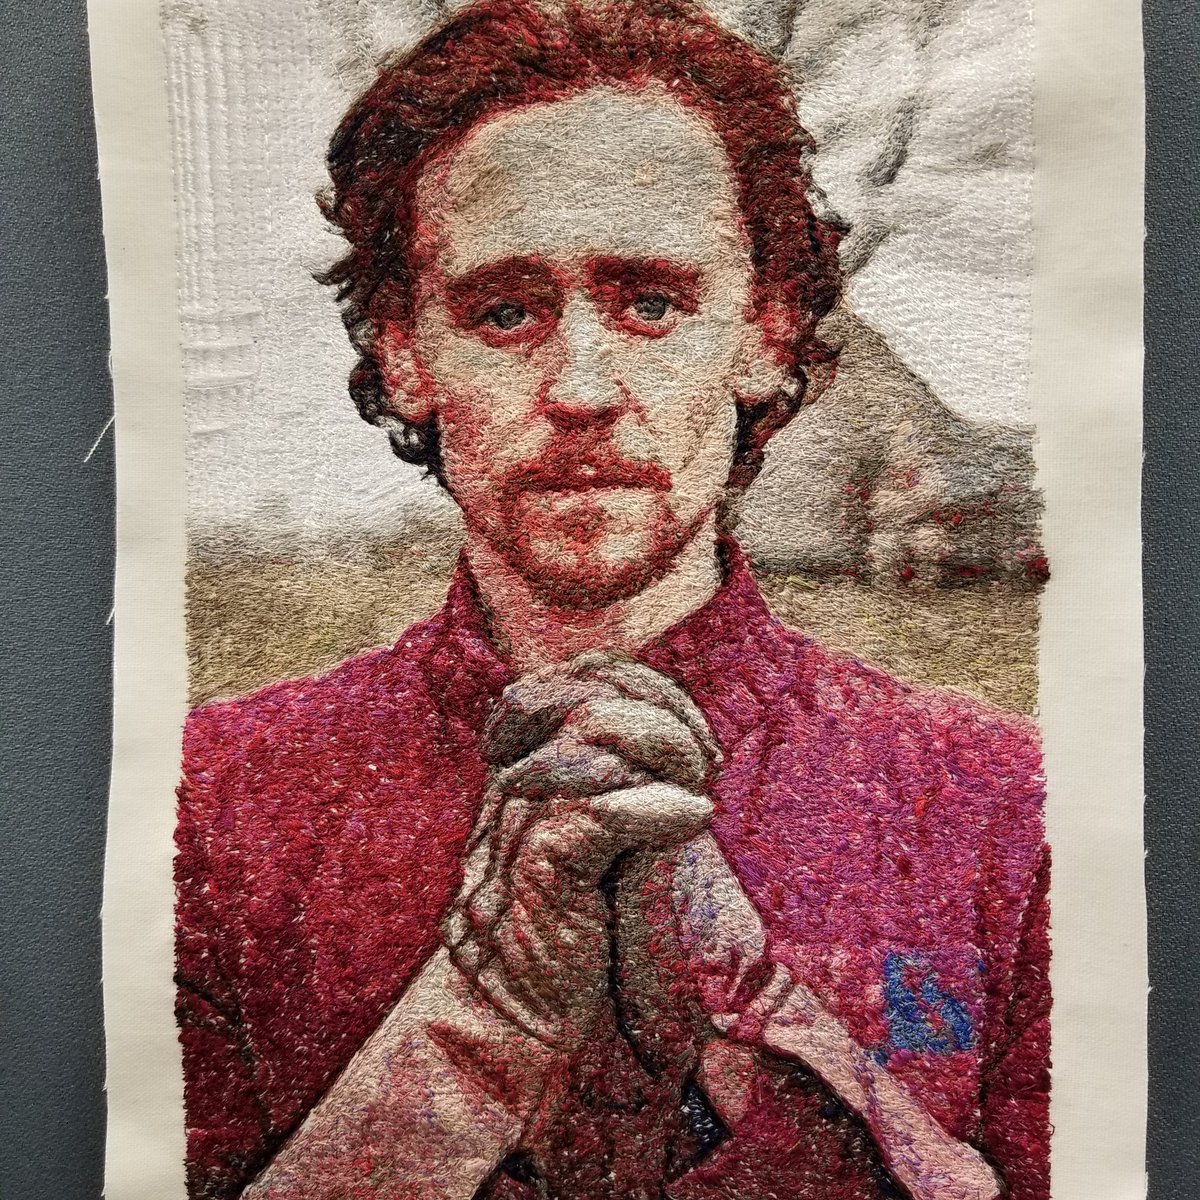 Tom Hiddleston as Henry V in The Hollow Crown. Still kind of messy but I love how the contrast turned out. #twhiddleston #tomhiddleston #hollowcrown #henryv #brotherembroidery #embroideryart #photostitch #hiddleston #threadpainting